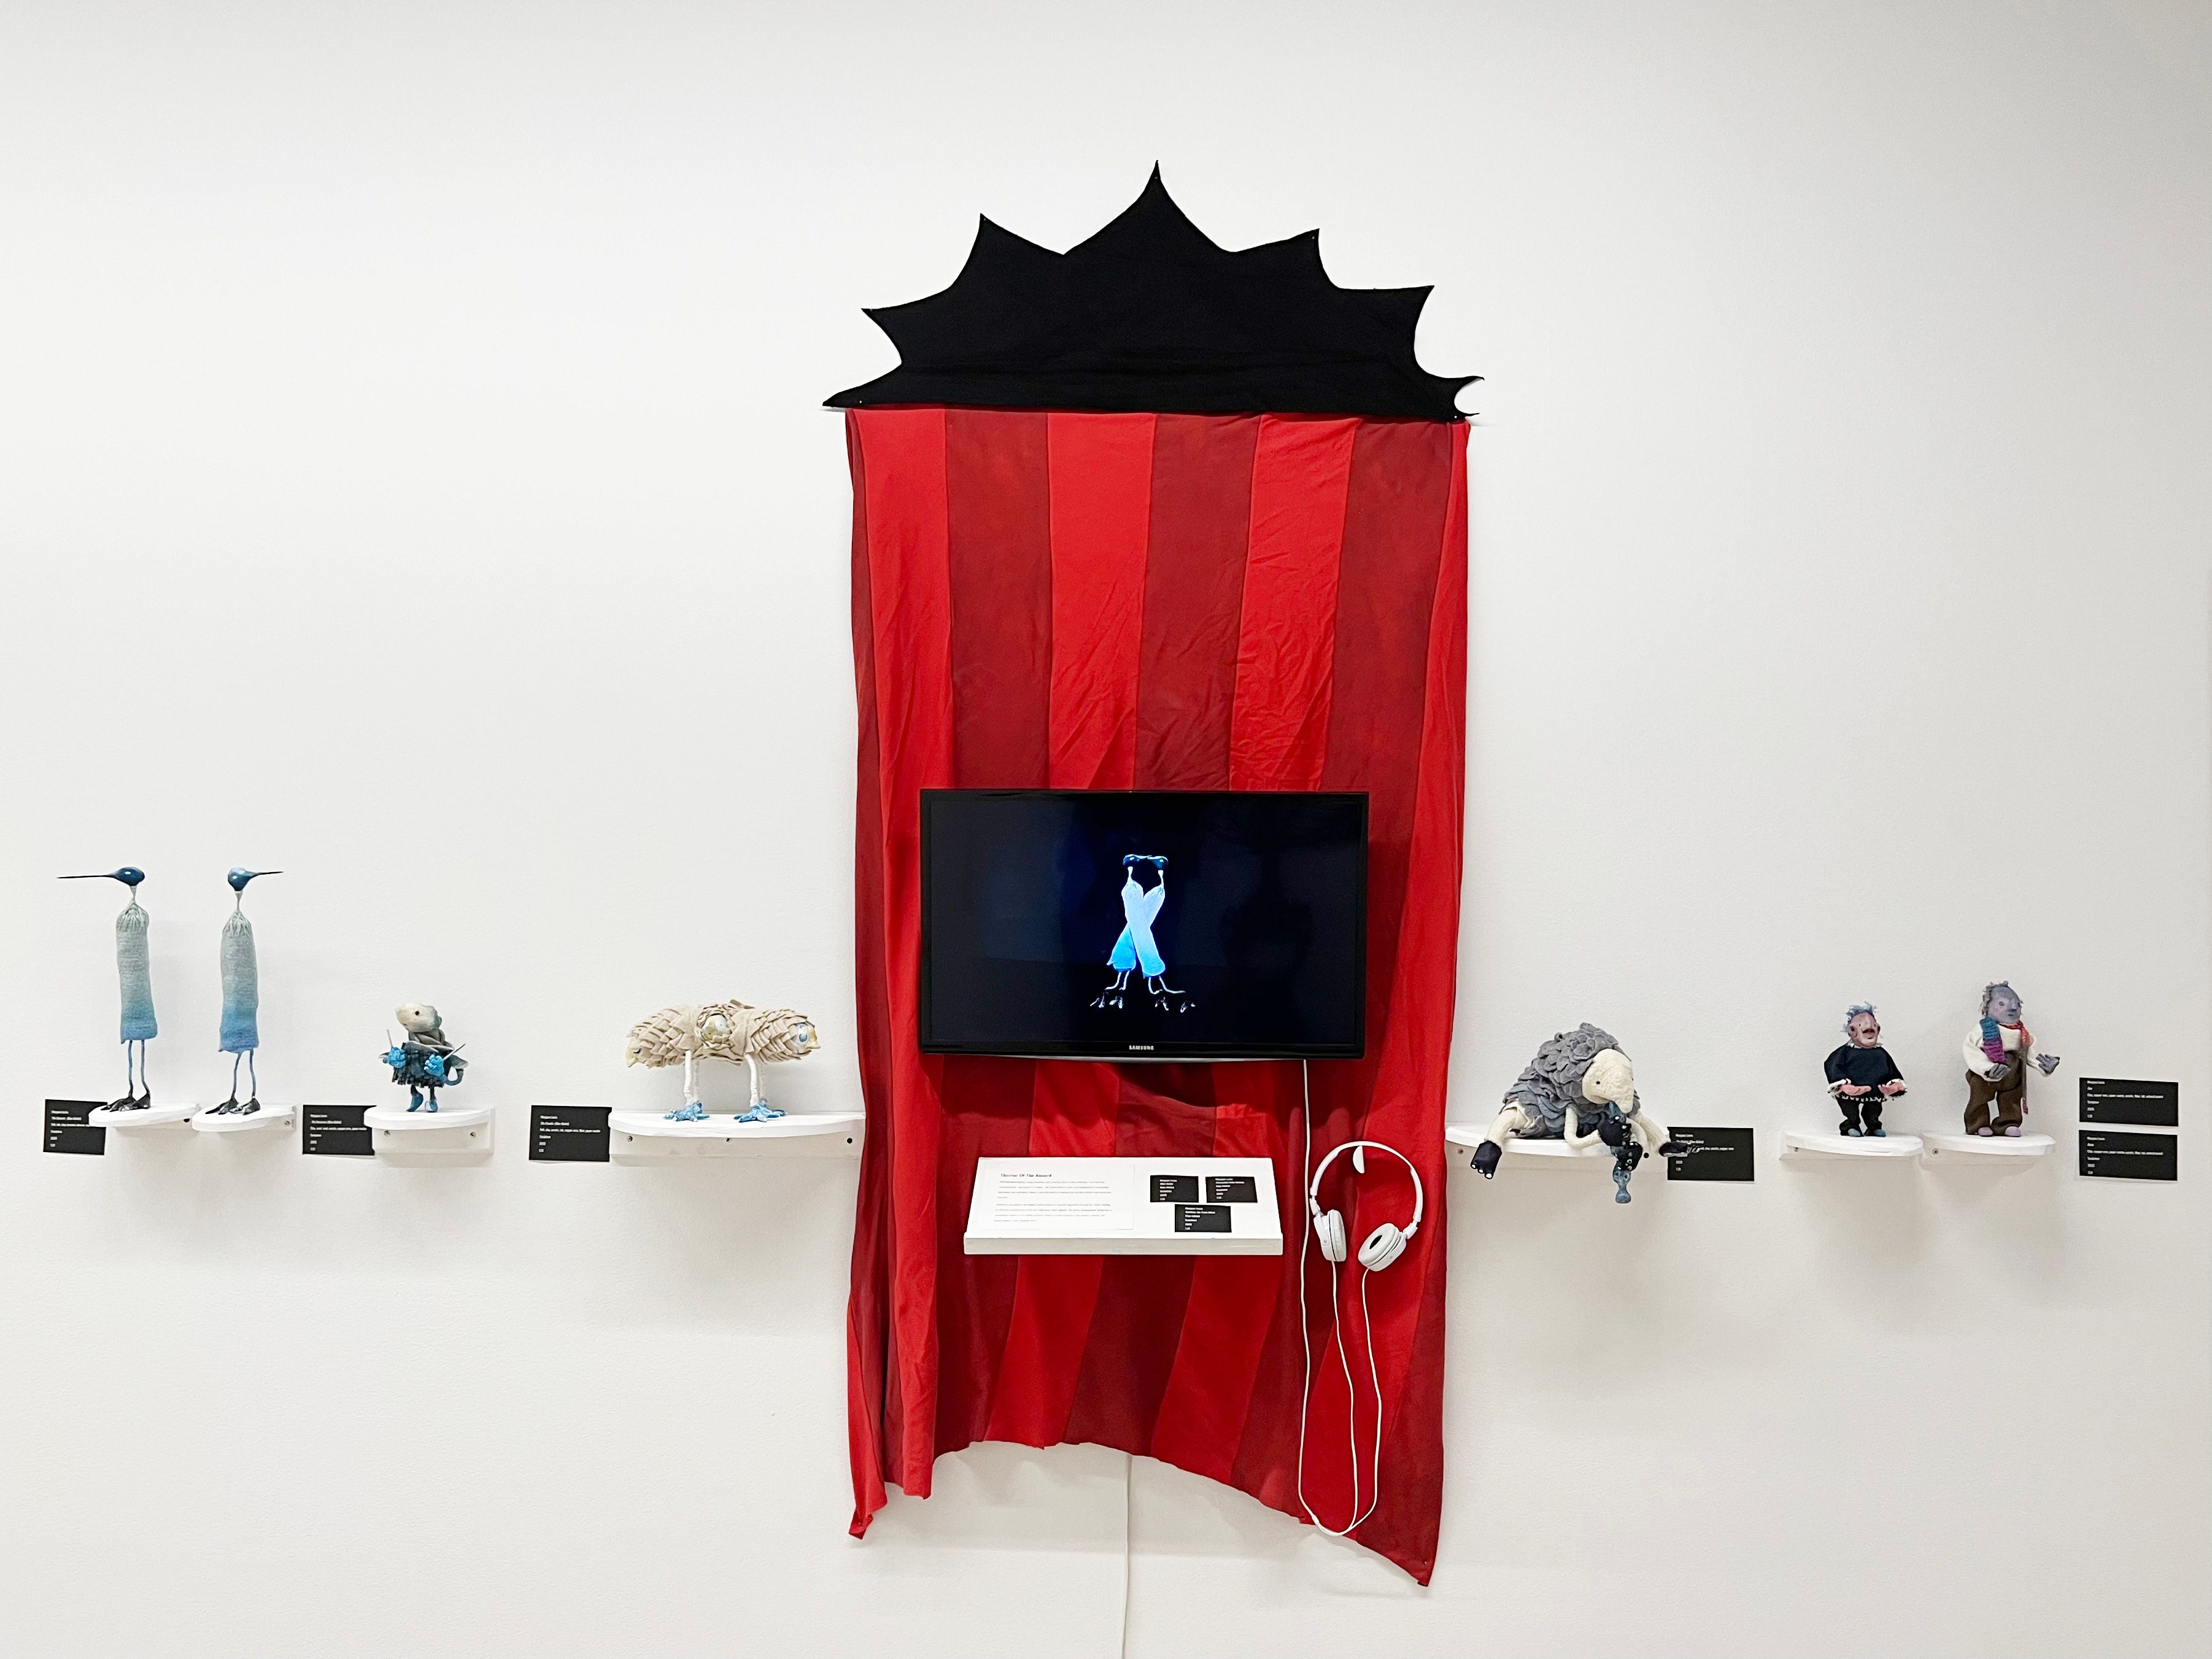 An installation of a stop-motion animation with sculptures displayed beside.